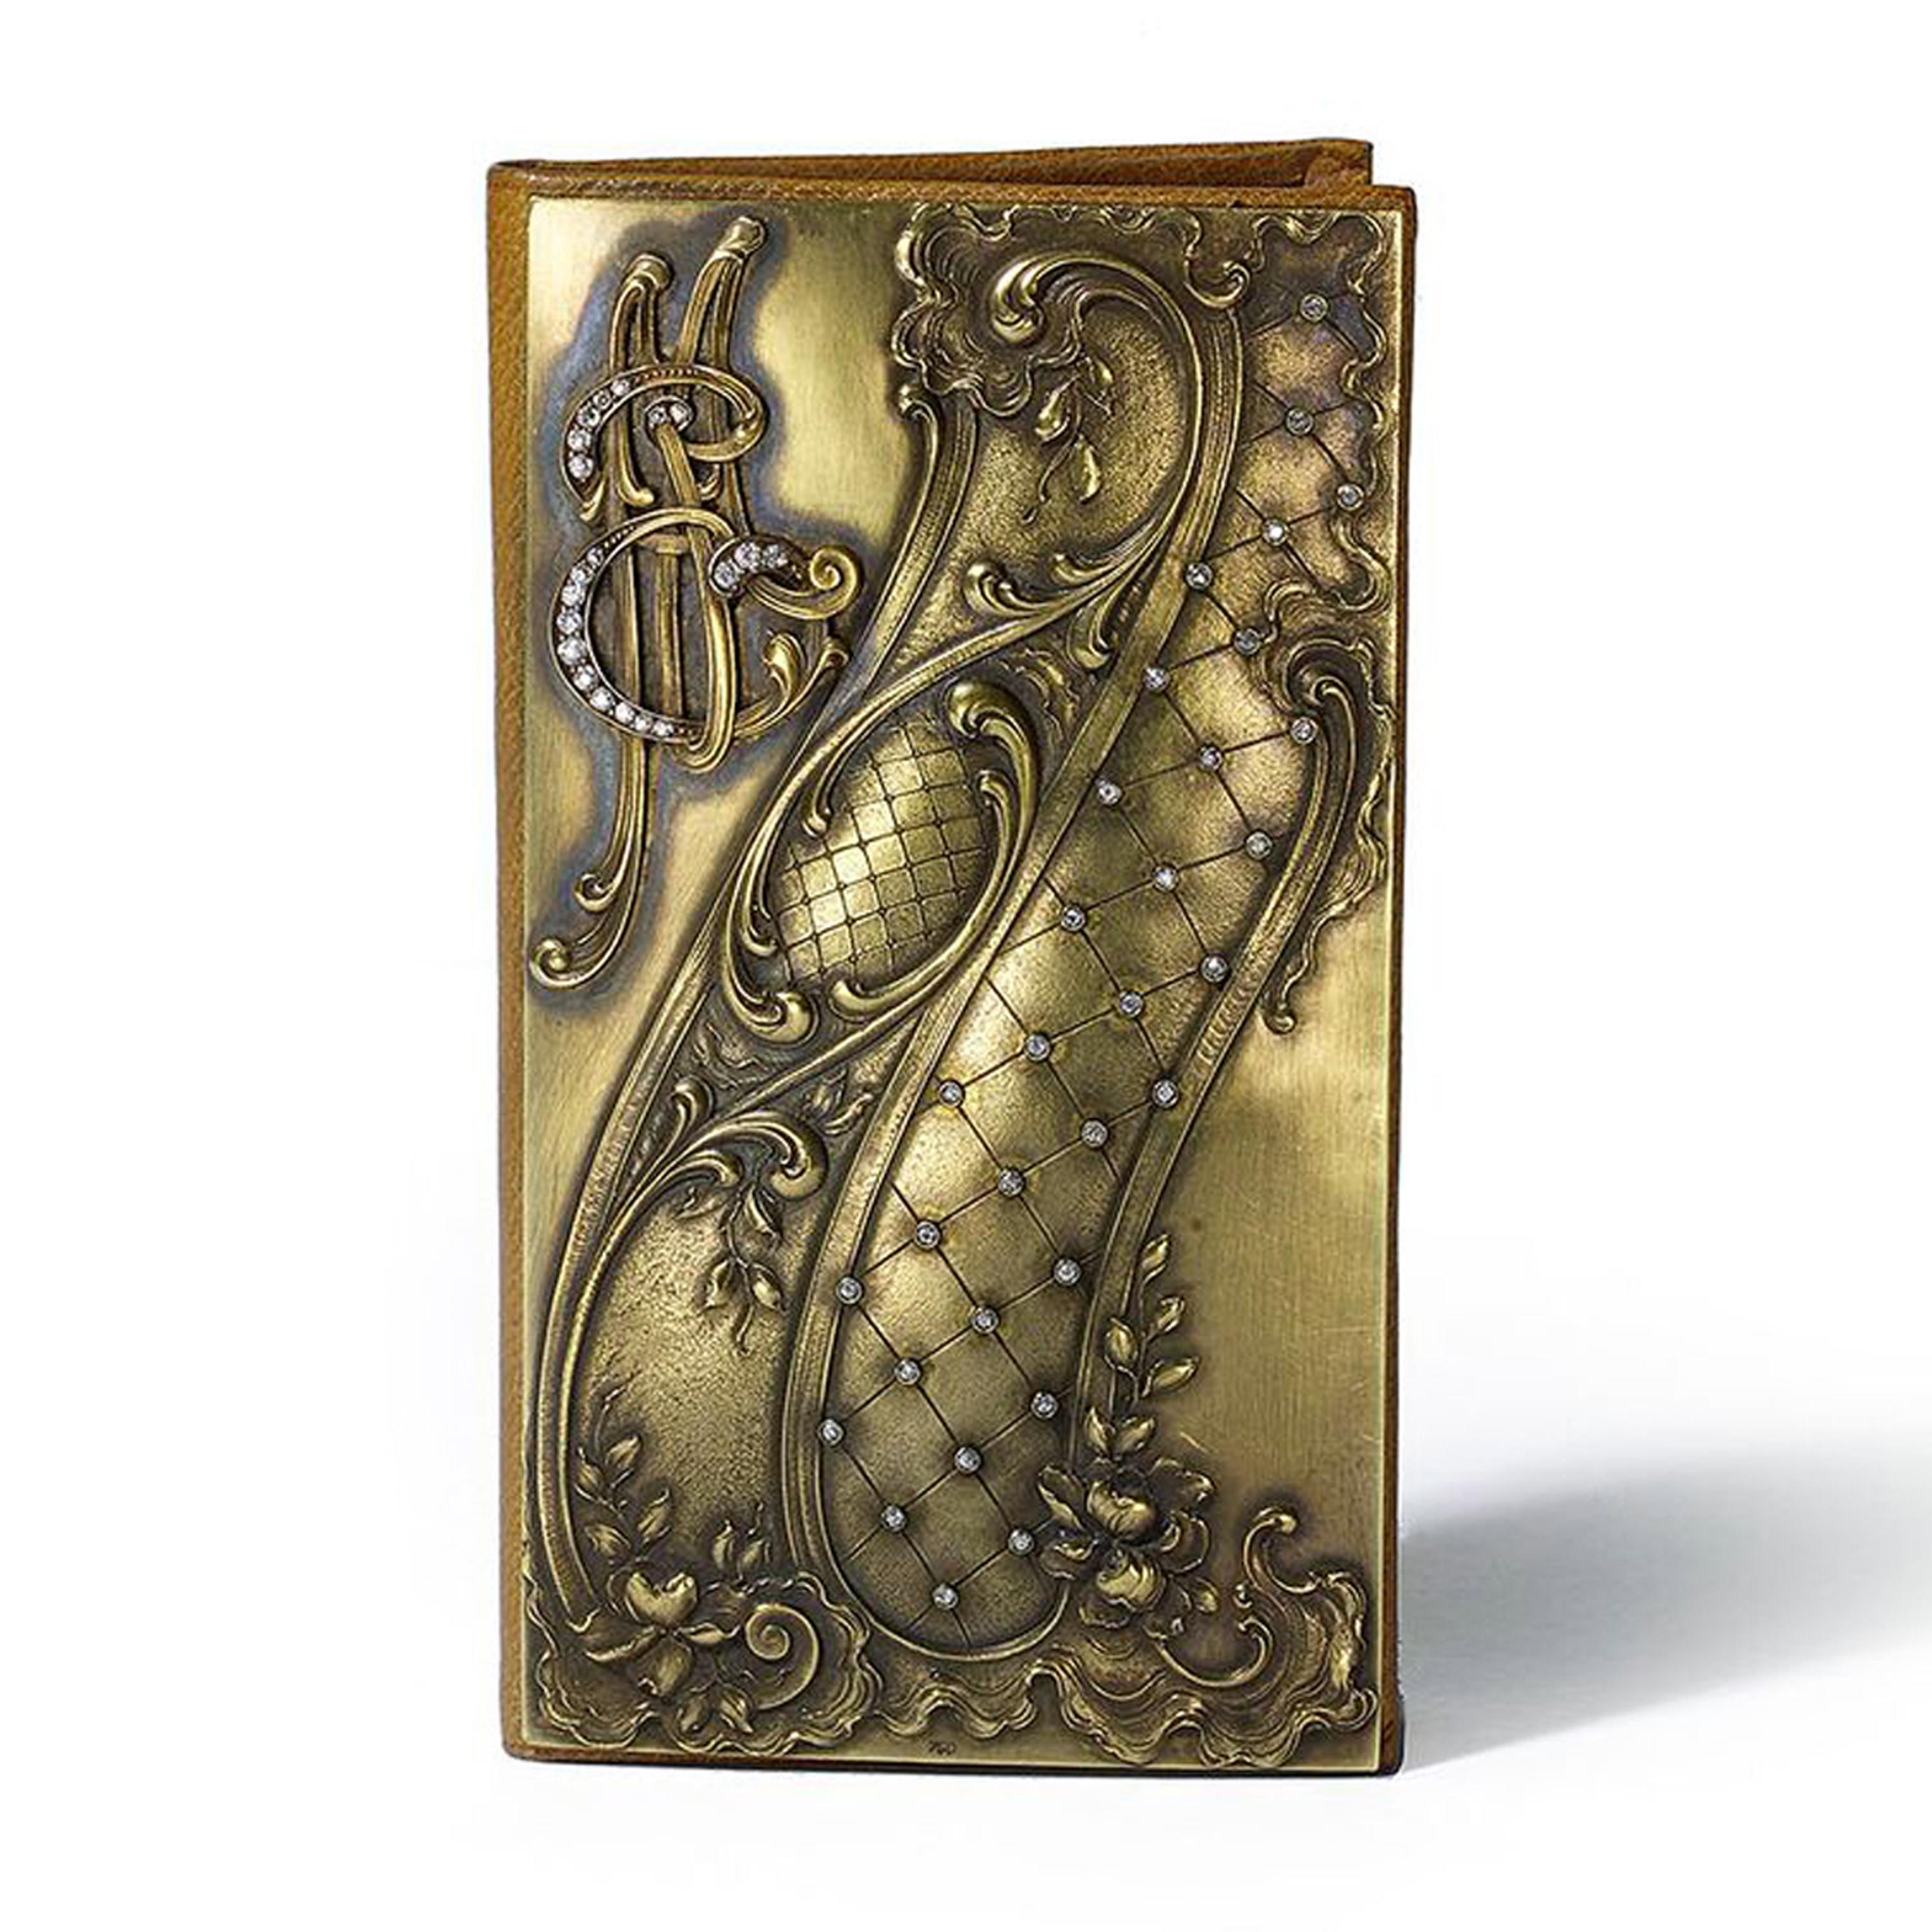 An Art Nouveau gold and diamond card wallet, with the gold front plate stamped, chased and carved with floral, scrolling and lattice motifs, highlighted with an oxidised finish, with an embossed monogram of initials M. E., with the E and the lattice